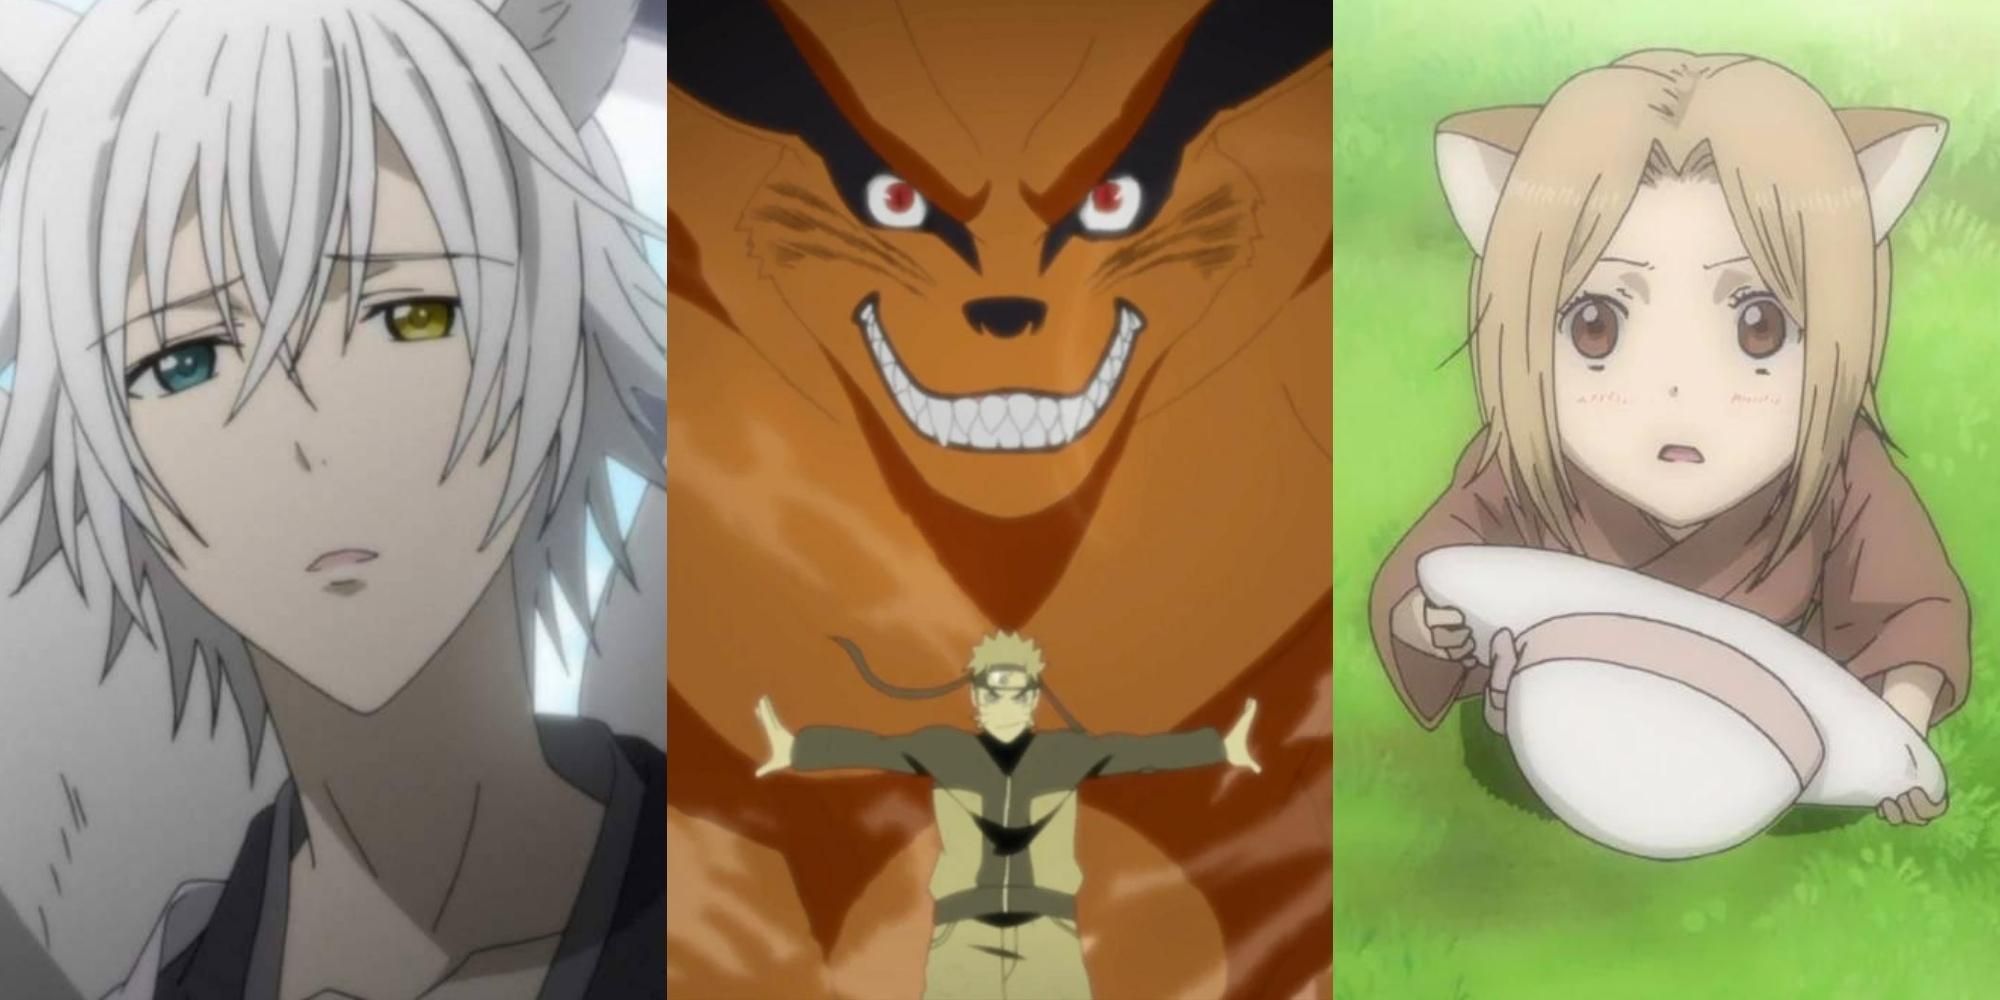 Soushi in Inu × Boku SS, Kyuubi and Naruto in Naruto, Little Fox in Natsume's Book of Friends